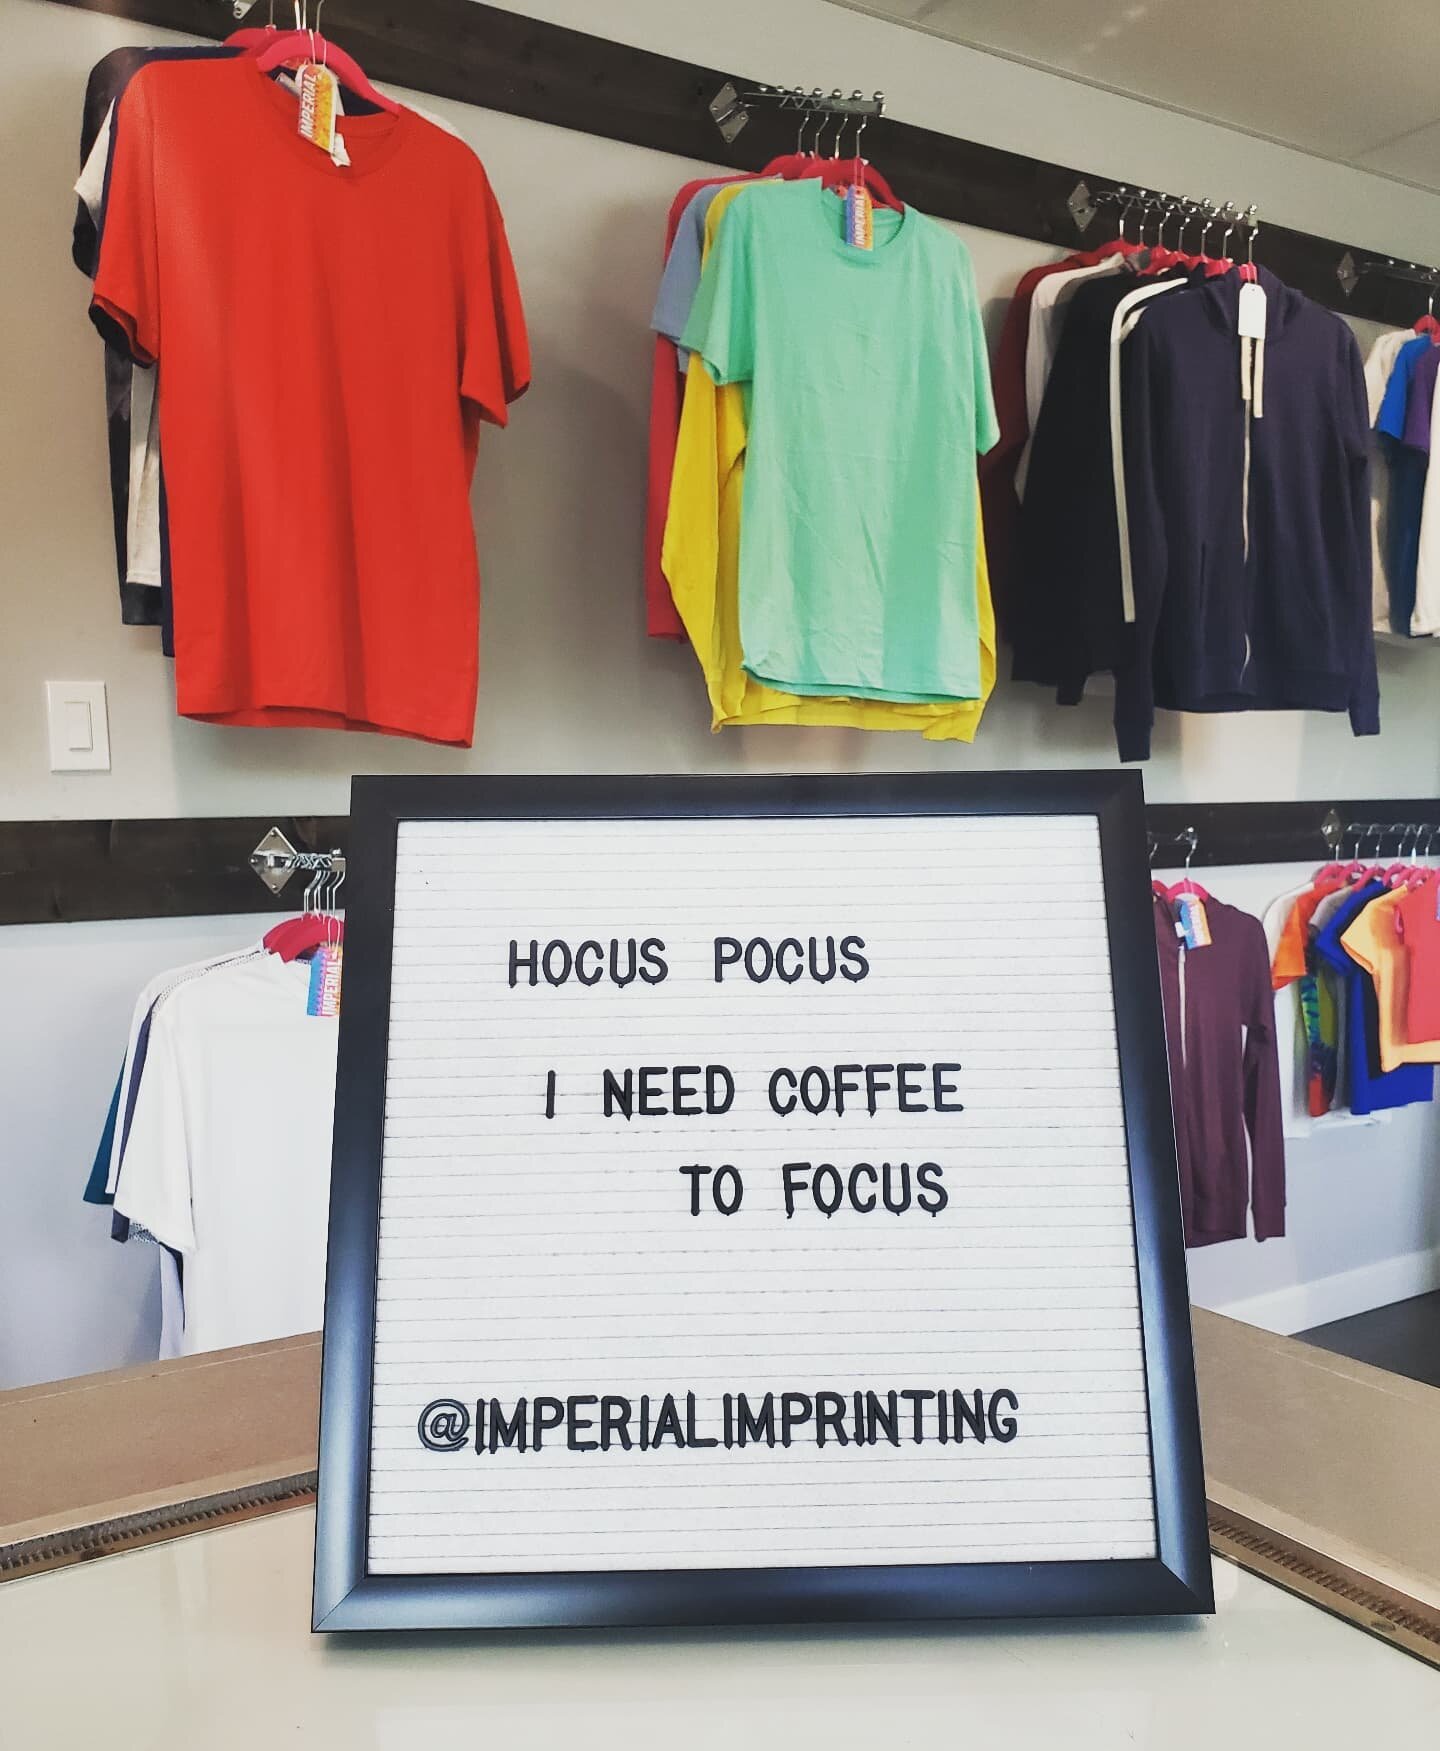 We're downing coffee over here in order to serve you better. Enjoy your Monday! 

#screenprinting #screenprinter #tshirt #apparel #clothing #fashion #printing #graphics #ink #imperial #imperialimprinting #shoplocal #shopsmall #verobeach  #verodoesnts